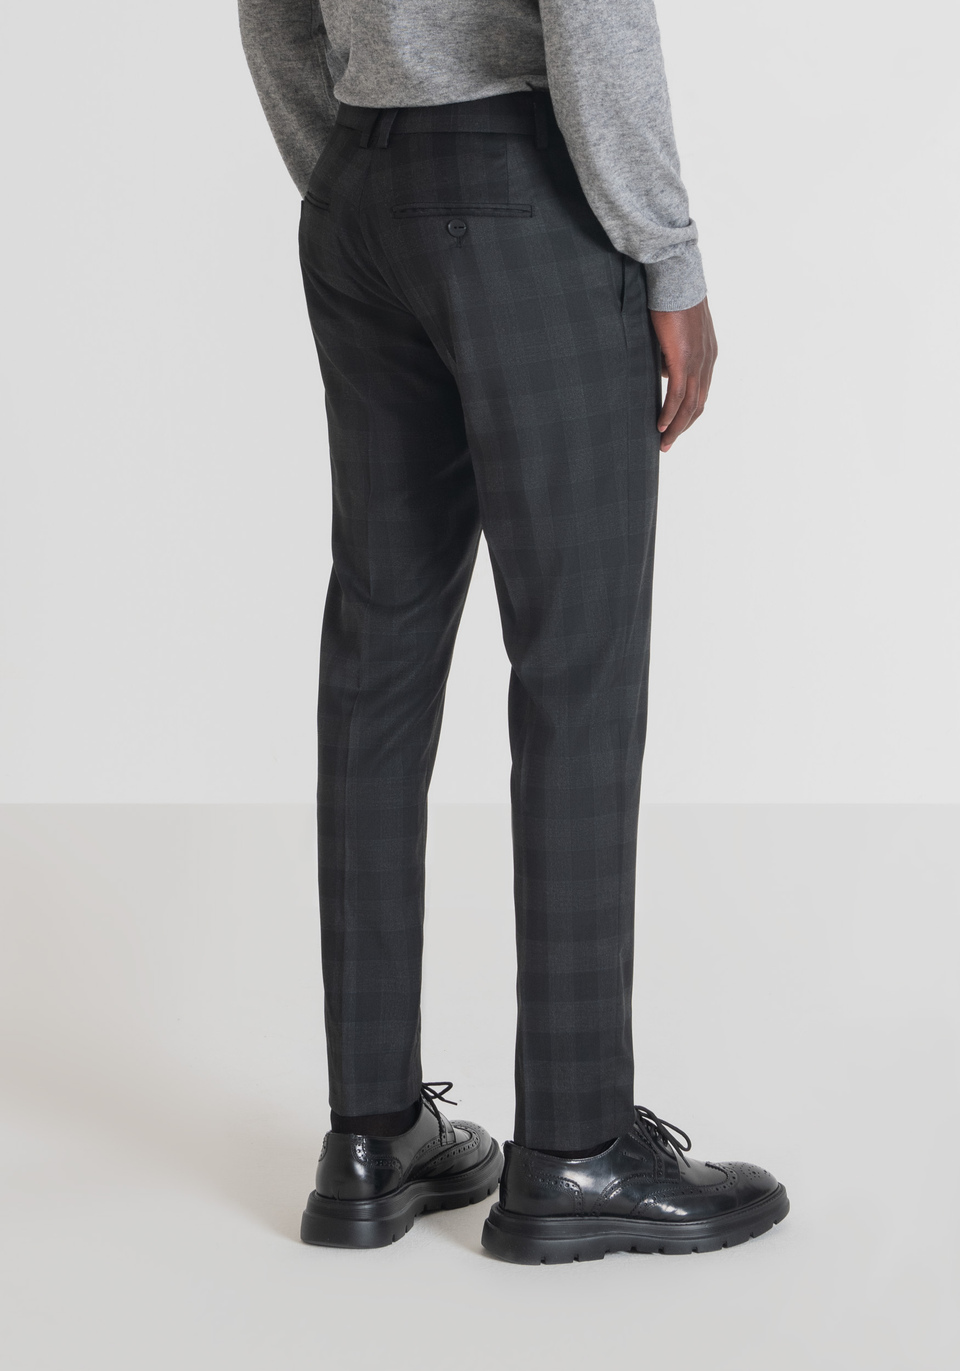 "BONNIE" SLIM-FIT TROUSERS WITH CHECK PATTERN - Antony Morato Online Shop